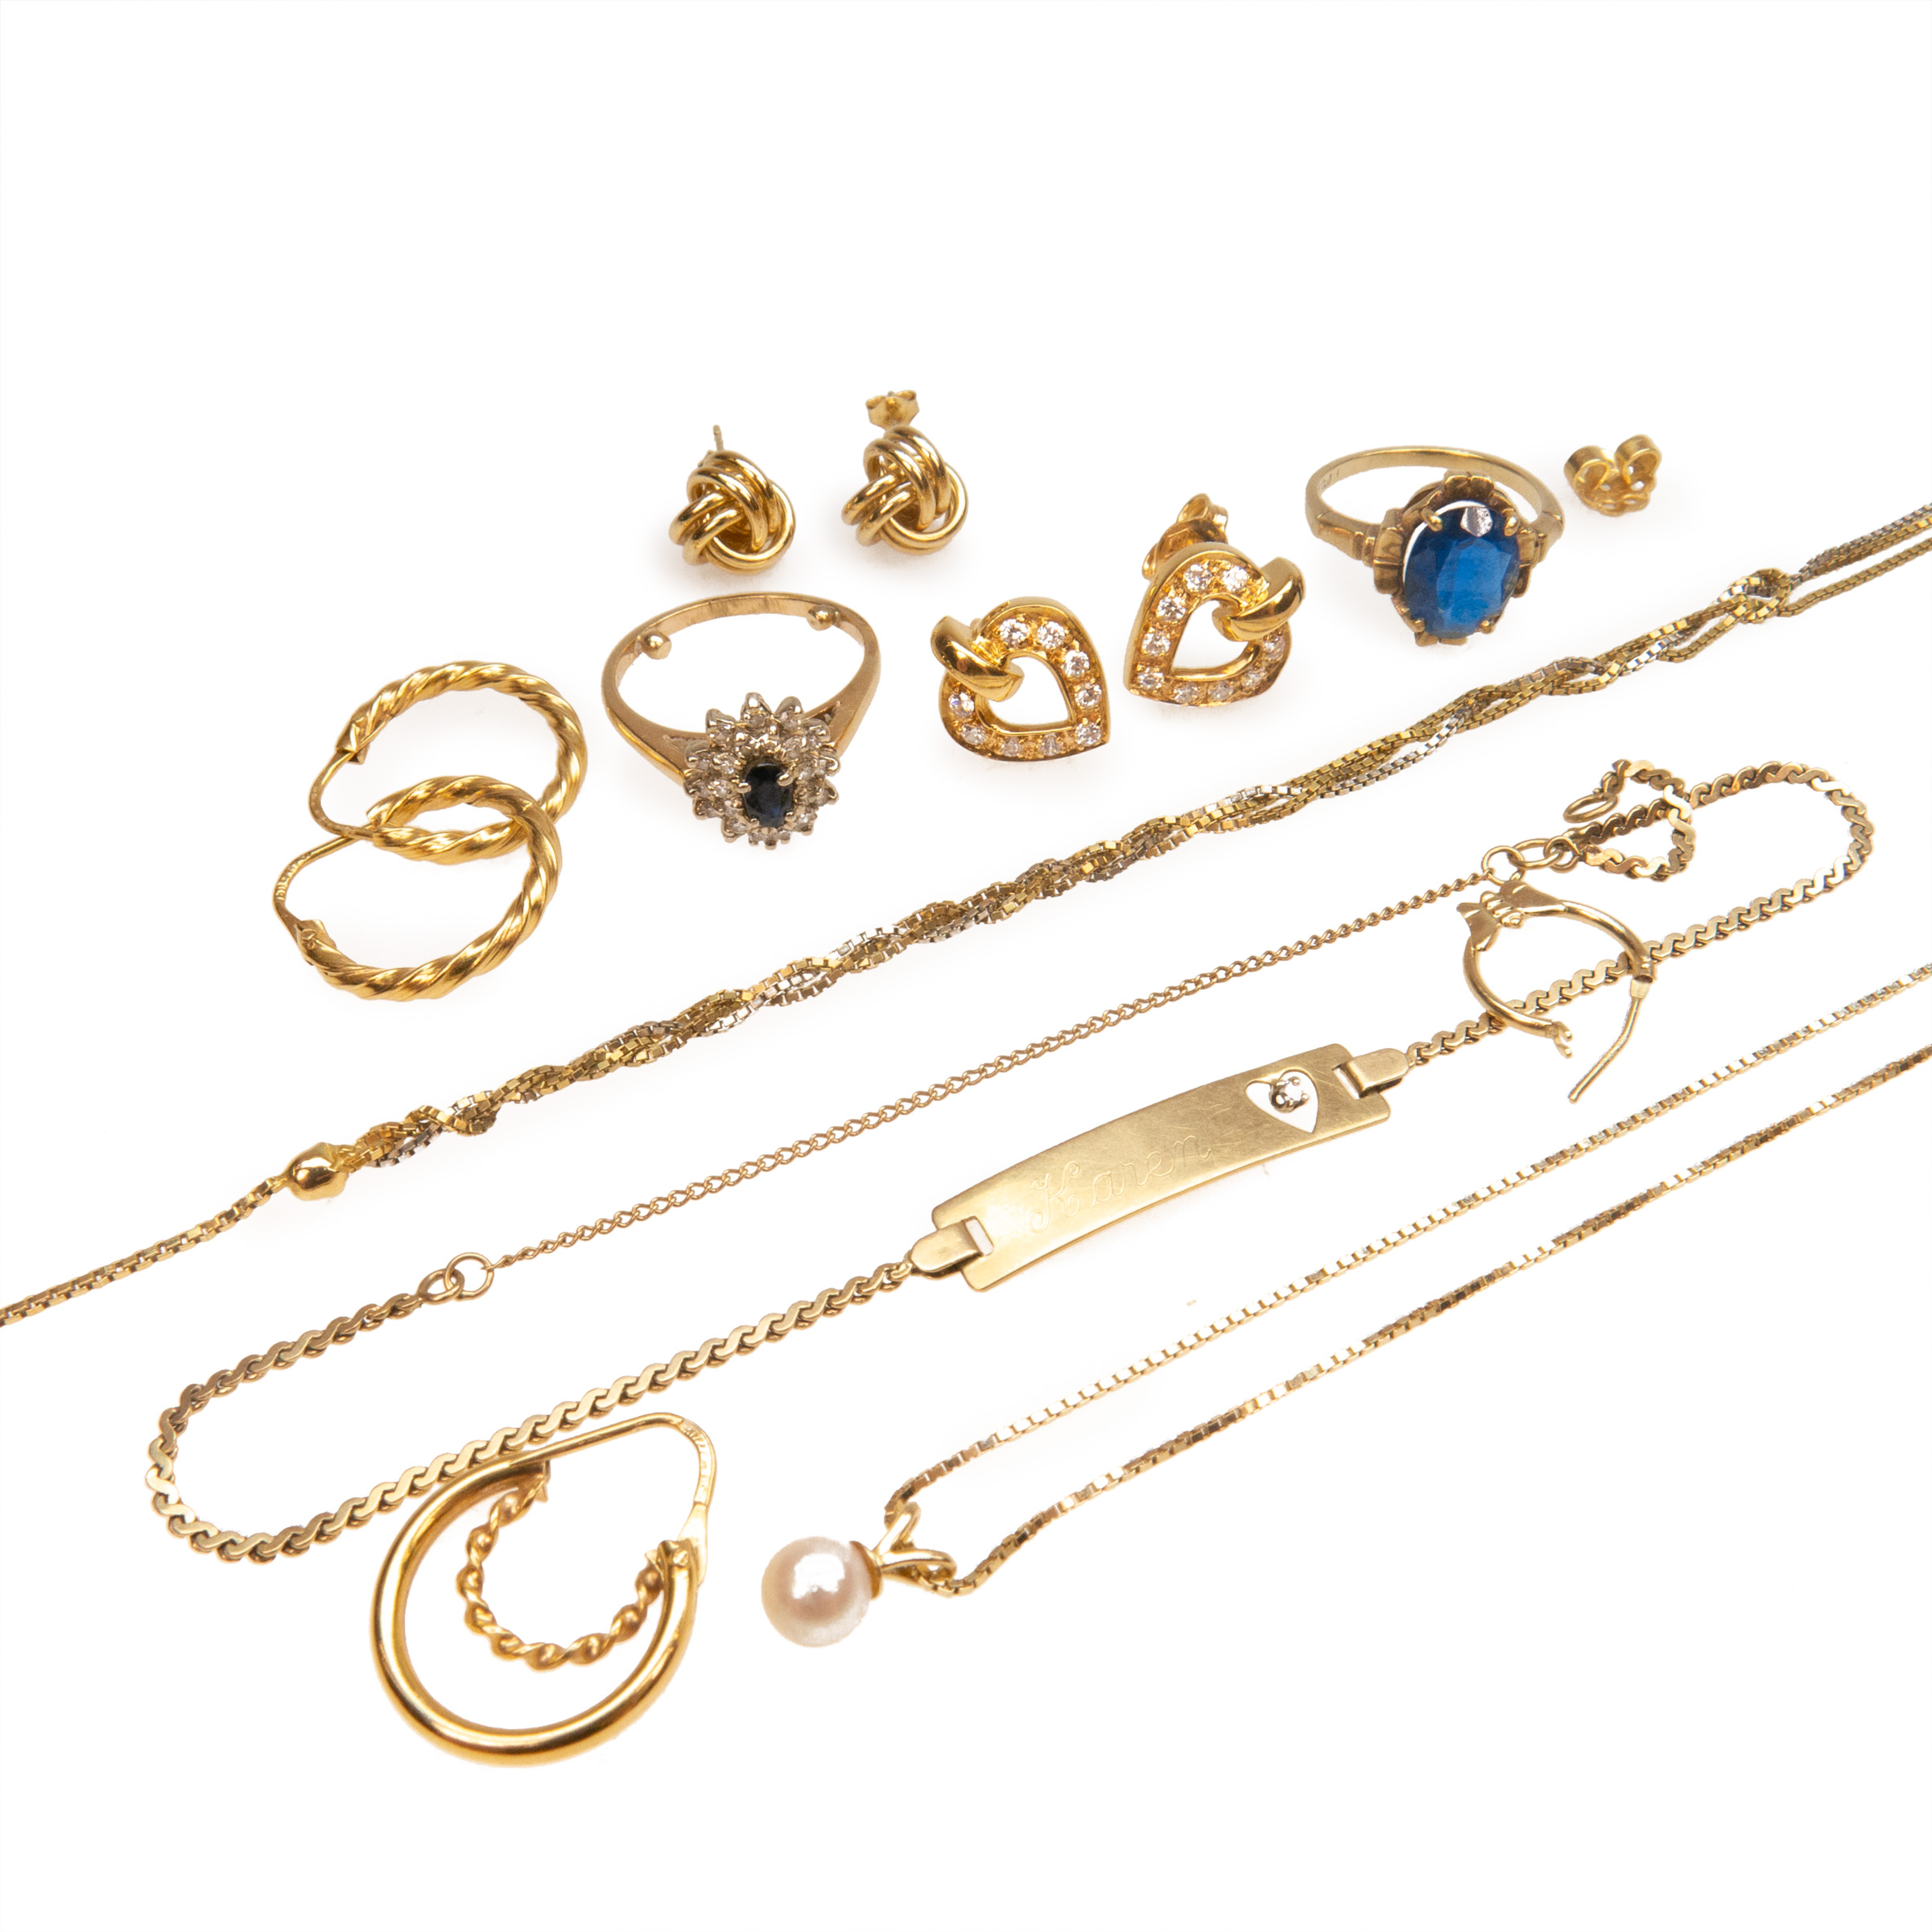 Small Quantity Of Gold, Silver And Gold Filled Jewellery